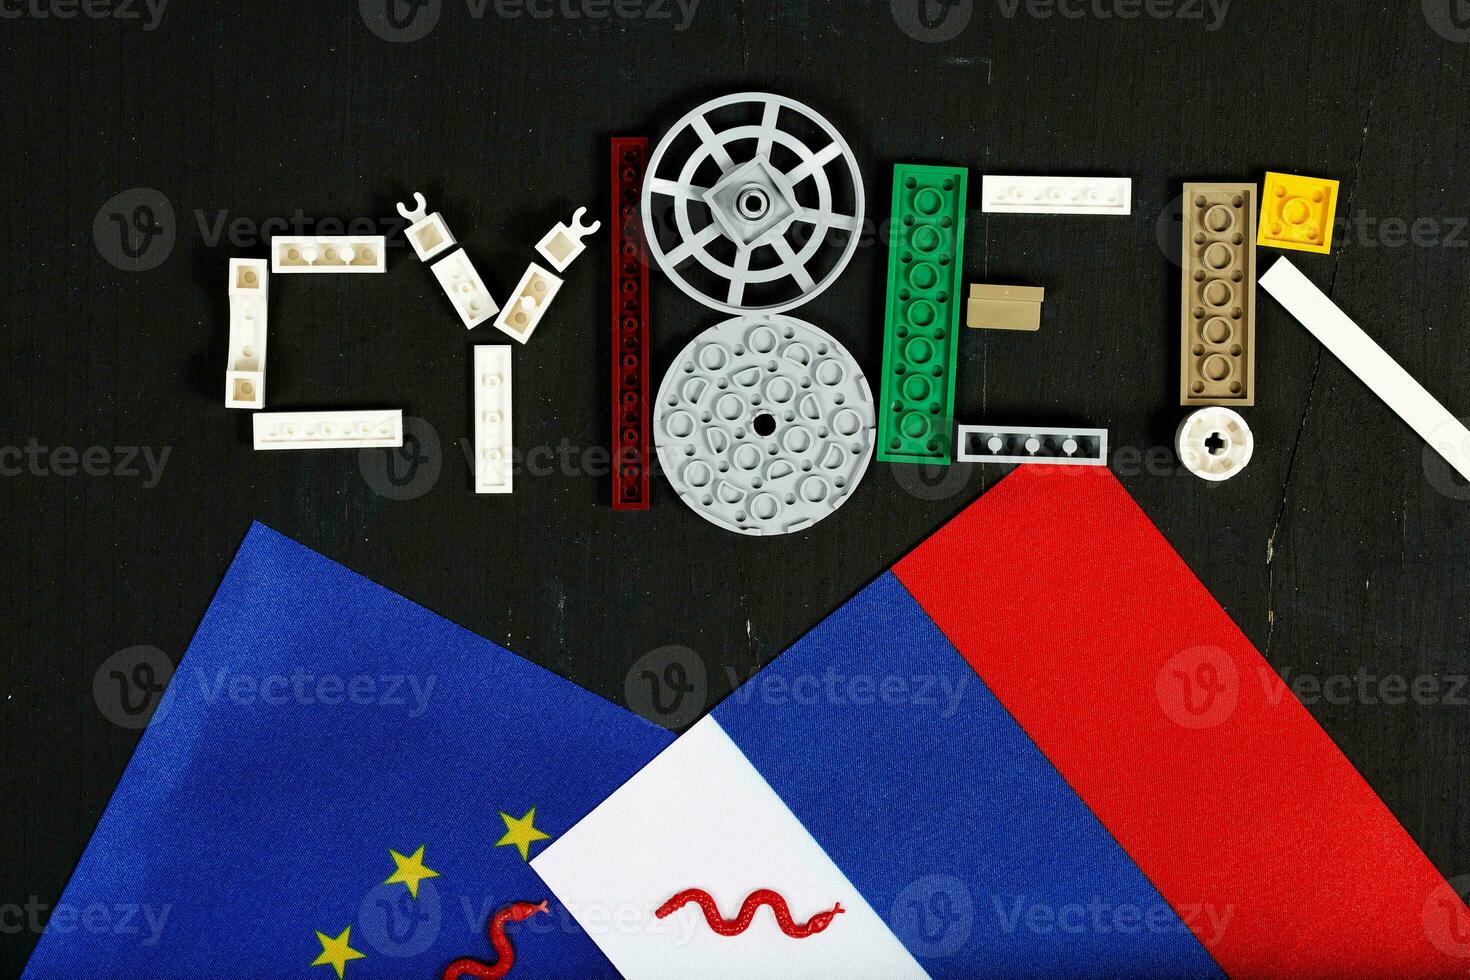 Cyber attack is composed of plastic mini block on a black surface.Background photo